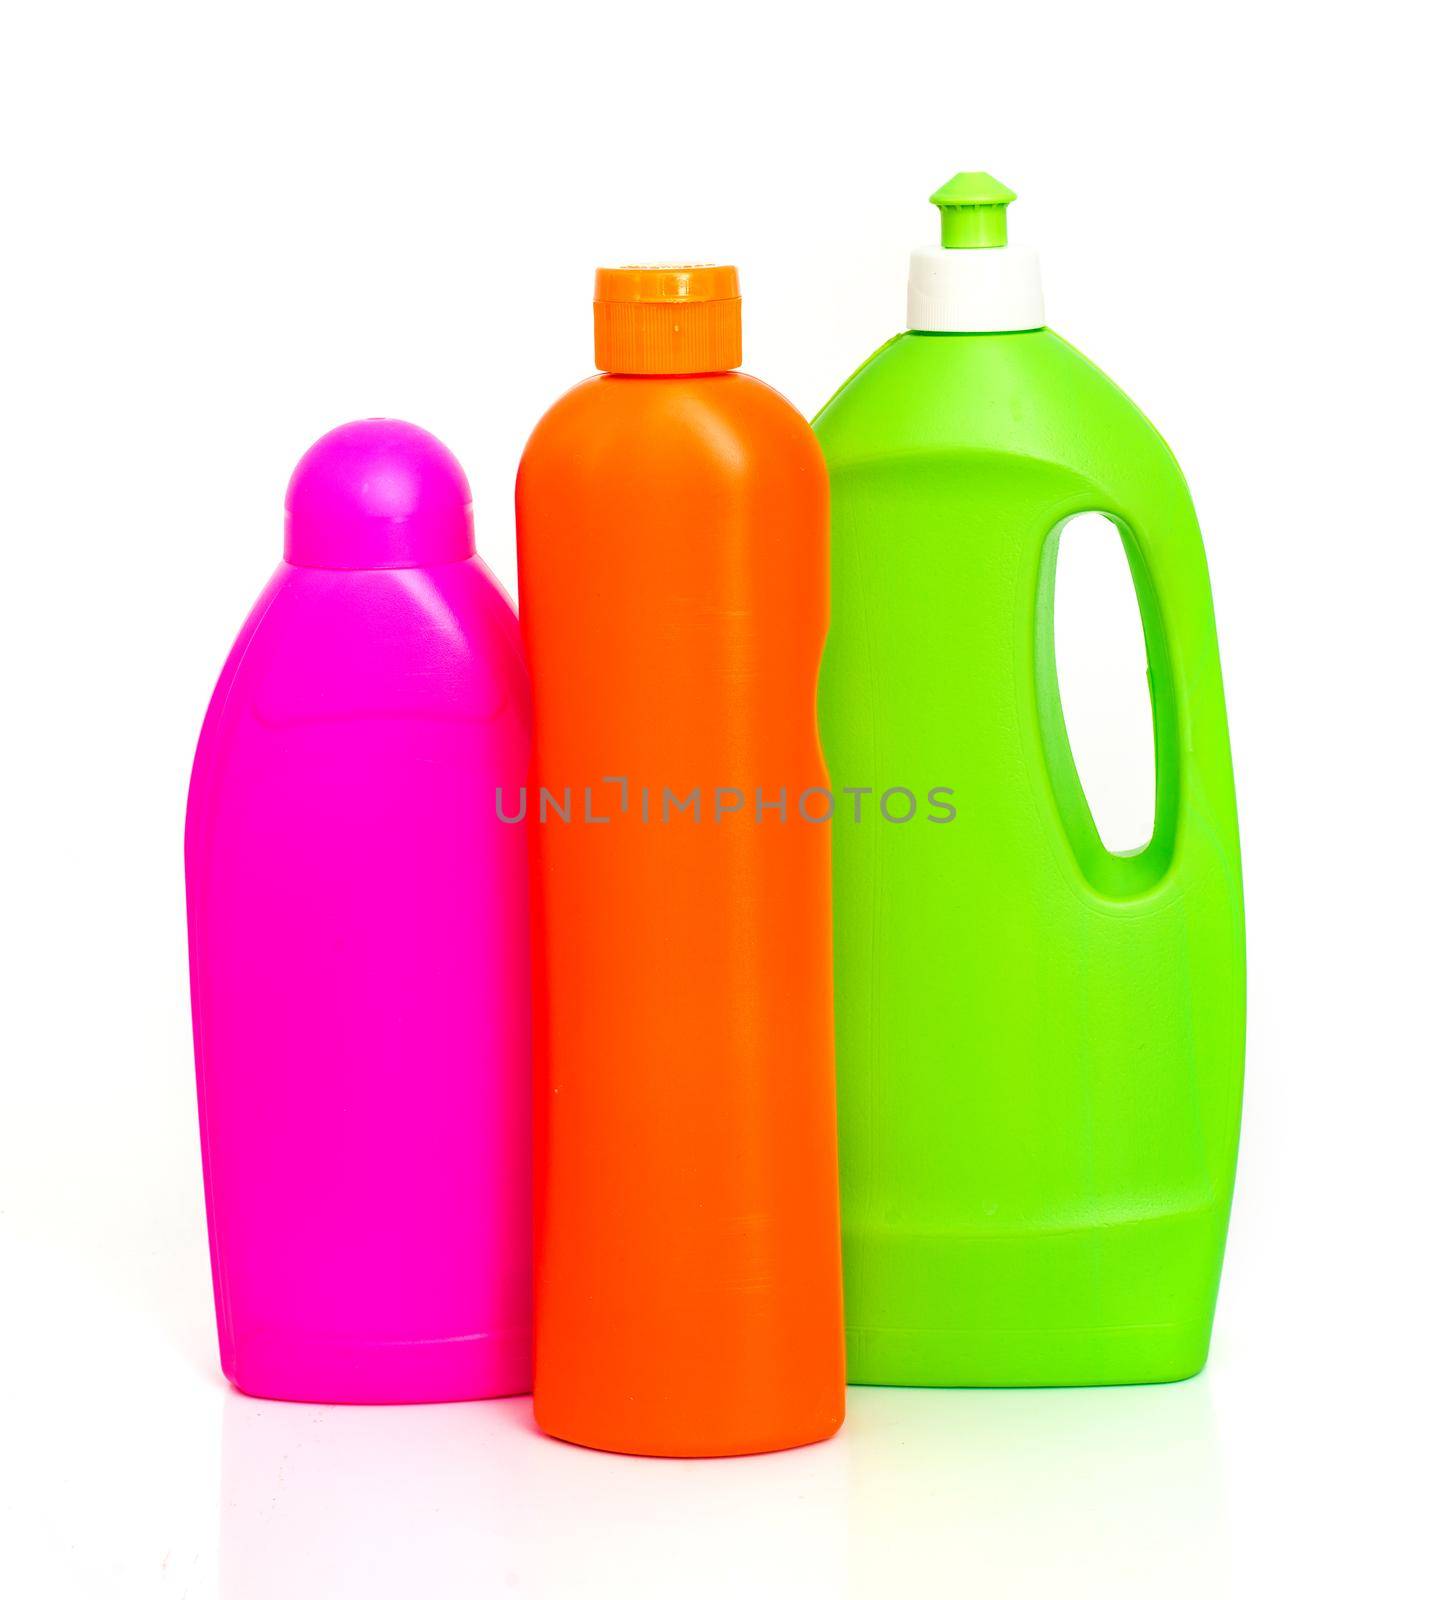 cleaning supplies isolated on white background